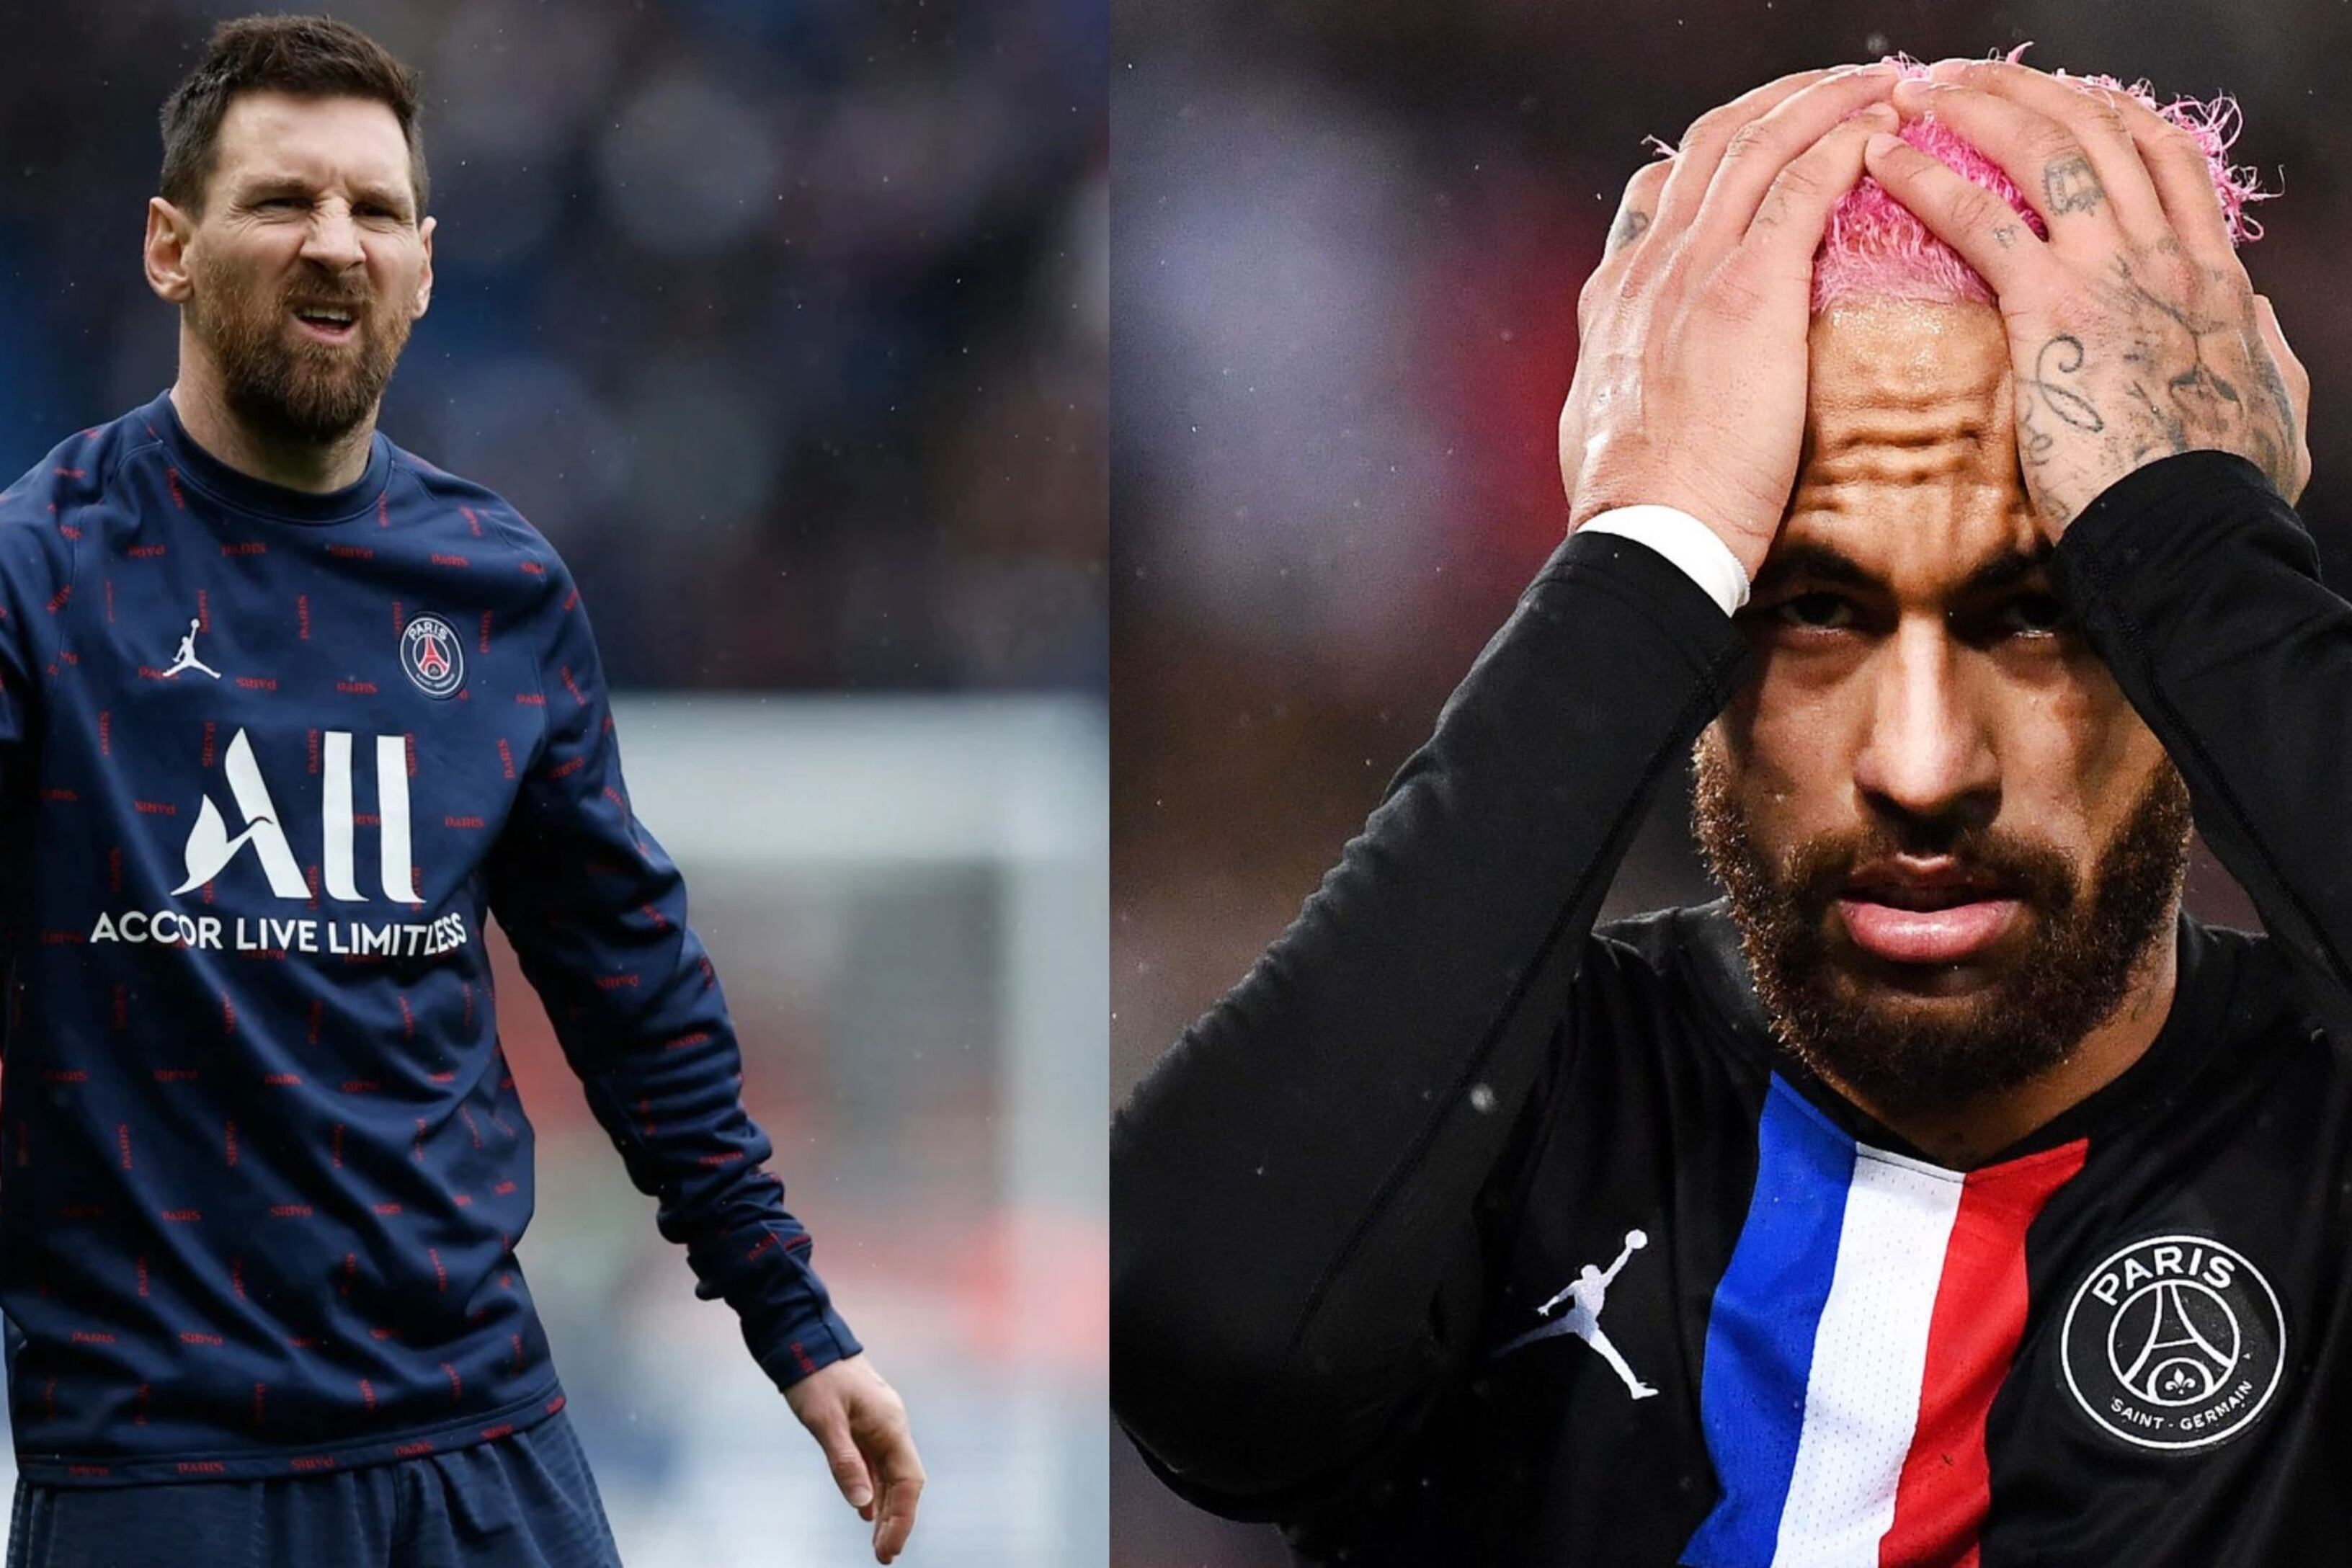 On top of being kicked out of PSG, the worst news Messi received about one of his best friends